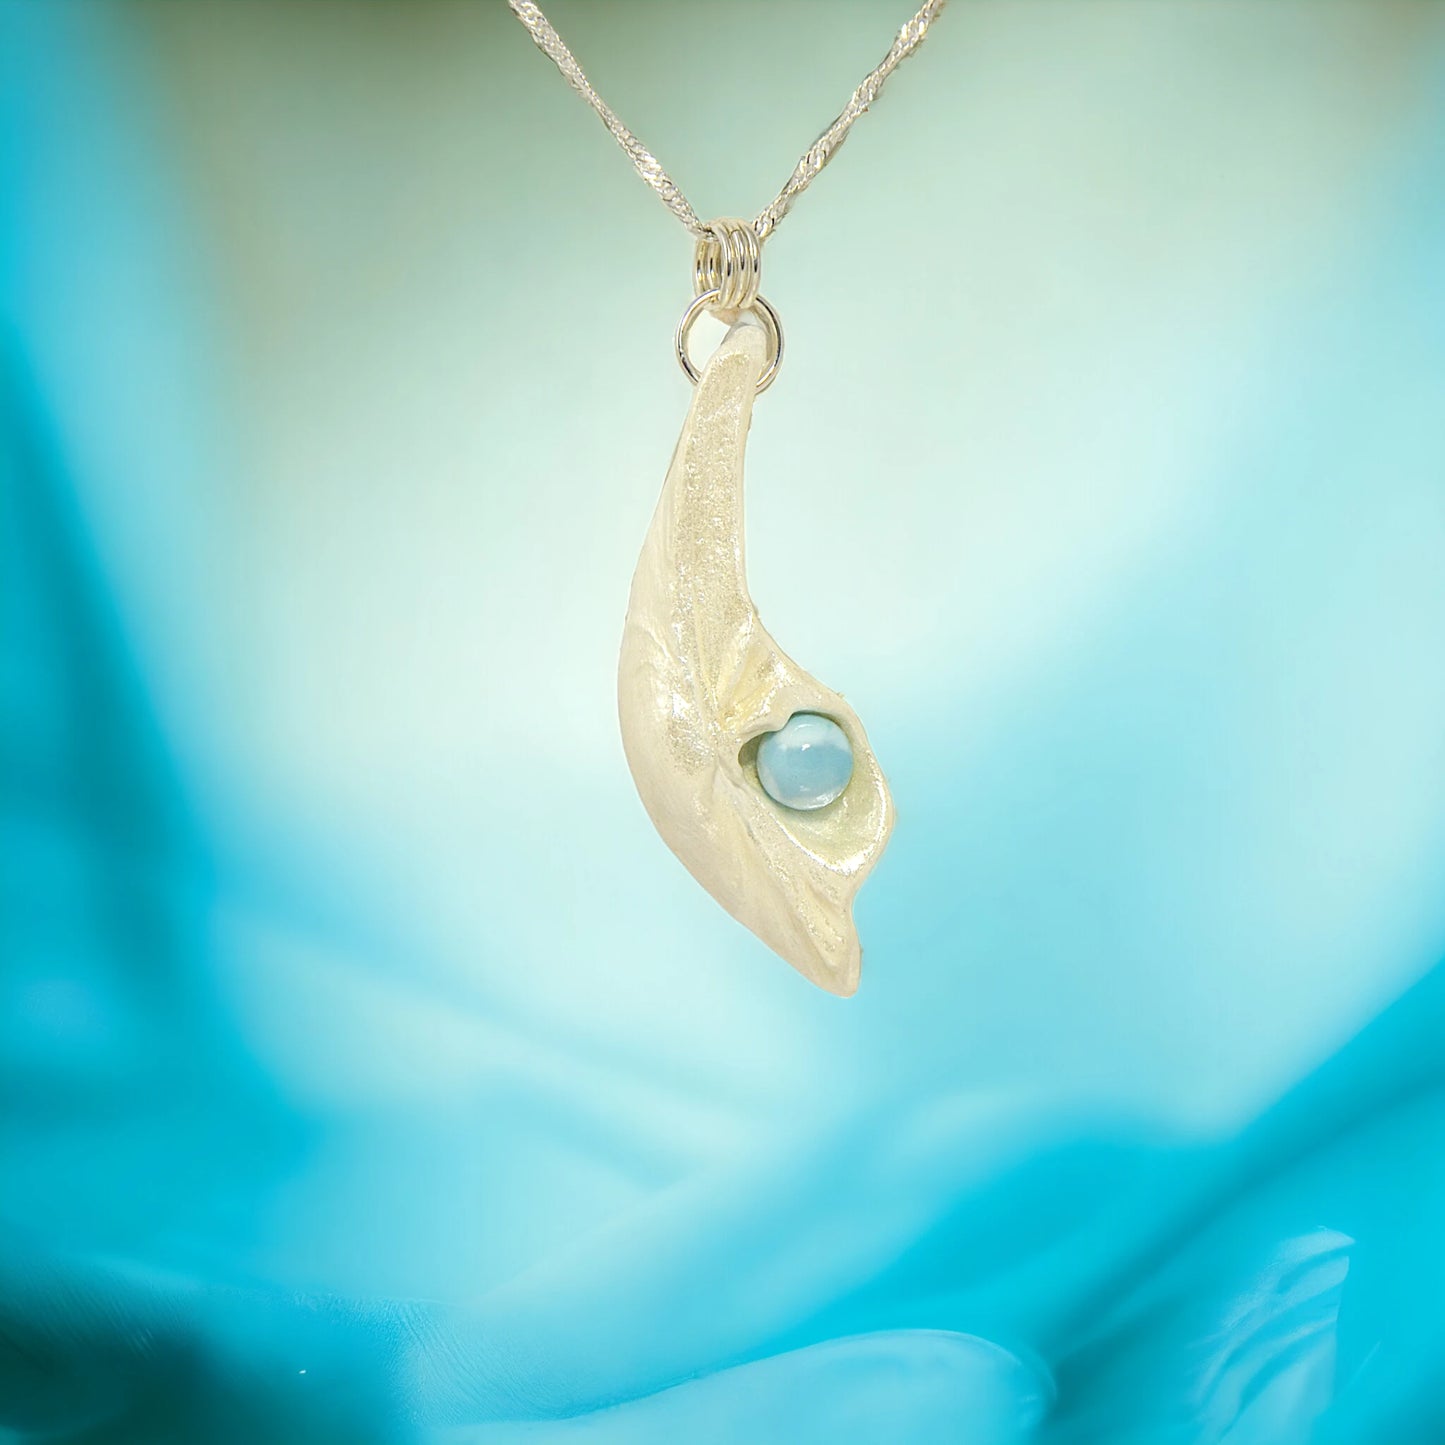 Larimar Moon Natural seashell a beautiful 10 mm Round Larimar Gemstone compliments the pendant. The pendant is shown on a white necklace displayer with a blue background.